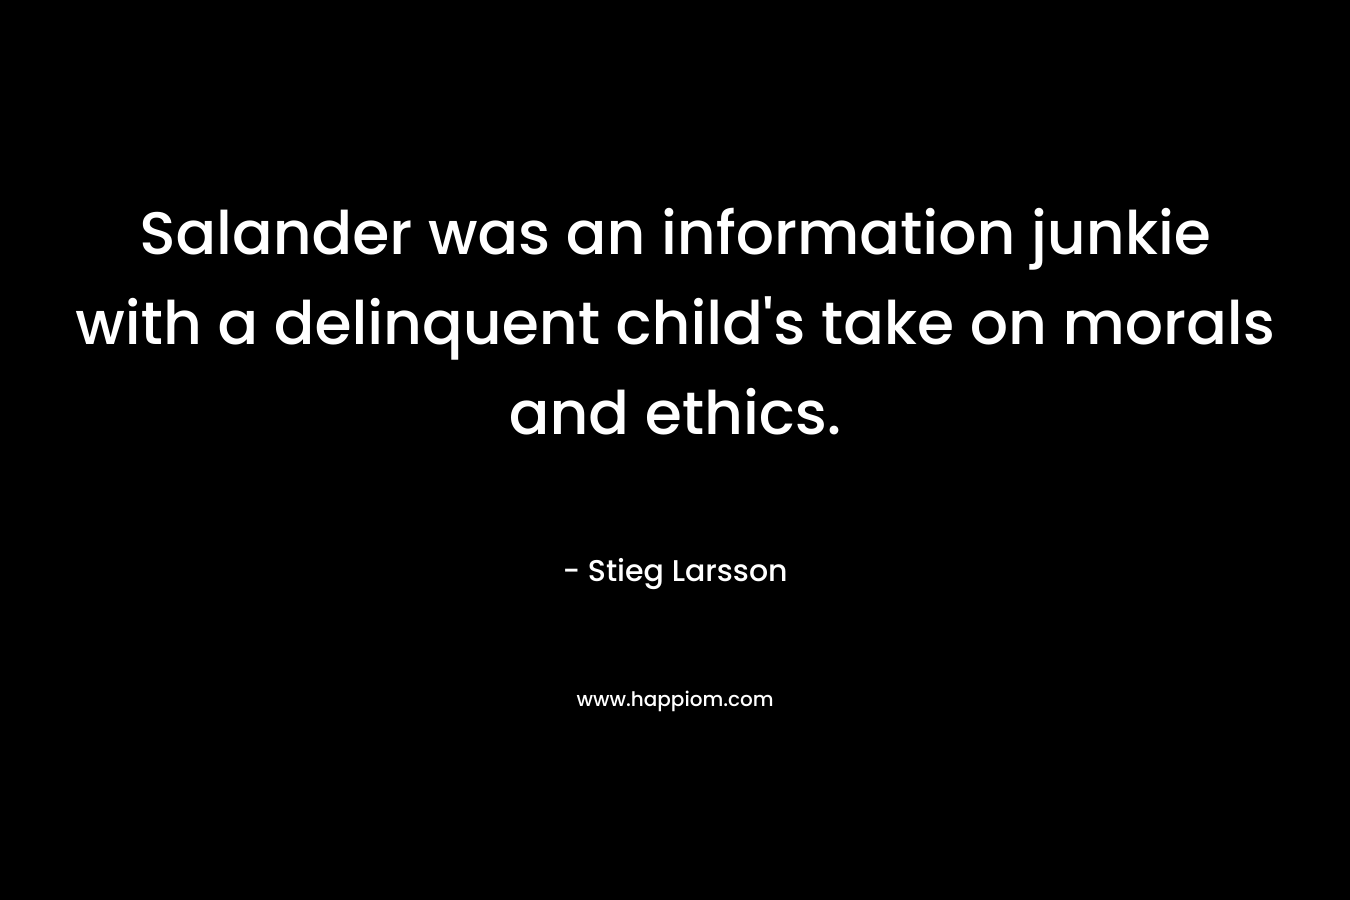 Salander was an information junkie with a delinquent child’s take on morals and ethics. – Stieg Larsson